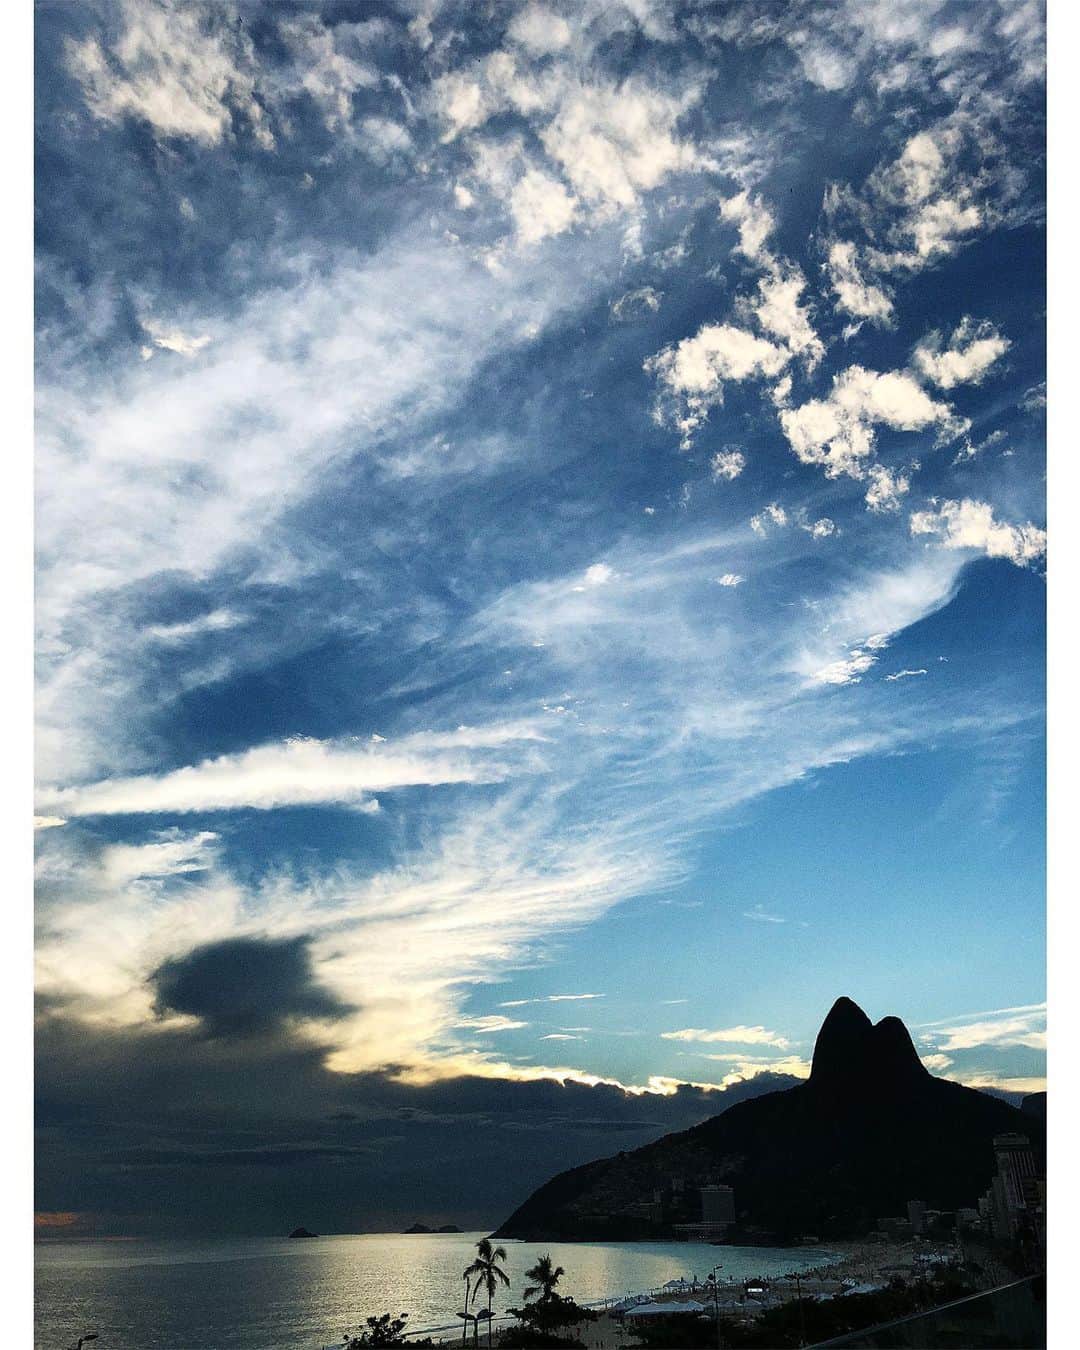 マリオ・テスティーノさんのインスタグラム写真 - (マリオ・テスティーノInstagram)「ON SALE NOW: Sunset 1, Rio de Janeiro, 2017.  This Limited edition print from the new series ‘Sunrises & Sunsets’ is on sale via the link in bio. ⁣ ⁣ As a photographer, I have realised nothing inspires me more than light.  I spend all my time checking to see if the light is beautiful or not. For me, the most impressive light is always daylight and the most magical moments are when the sun rises in the morning and when it sets again at dusk.  I have been fortunate to document these moments around the world and am happy to present them here for my Instagram followers, and for the first time make them available to purchase. I hope you enjoy them as much as I do. ⁣ -⁣ EN  VENTA AHORA: Me he dado cuenta de que, como fotógrafo, nada me inspira más que la luz. Siempre estoy mirando si la luz es hermosa o no. La luz más impresionante para mí es siempre la luz del día y los momentos más mágicos son cuando sale el sol por la mañana y cuando se pone al atardecer. Tuve la suerte de documentar estos momentos en todo el mundo y estoy feliz de presentarlos aquí para mis seguidores de Instagram; además de que, por primera vez, estén disponibles para compra. Espero que los disfruten tanto como yo.⁣ -⁣ SUNRISES & SUNSETS SERIES, 2020 ⁣ -⁣ The five prints from the Sunrise & Sunset Series are available to buy at a special introductory price, link in bio.⁣ Please note, framed images are for illustrative purposes only.  ⁣ #SunriseAndSunsetSeries #Sunset #Sunrise #TestinoLight #Rio #Brazil #MarioTestino⁣ ⁣」7月1日 22時32分 - mariotestino